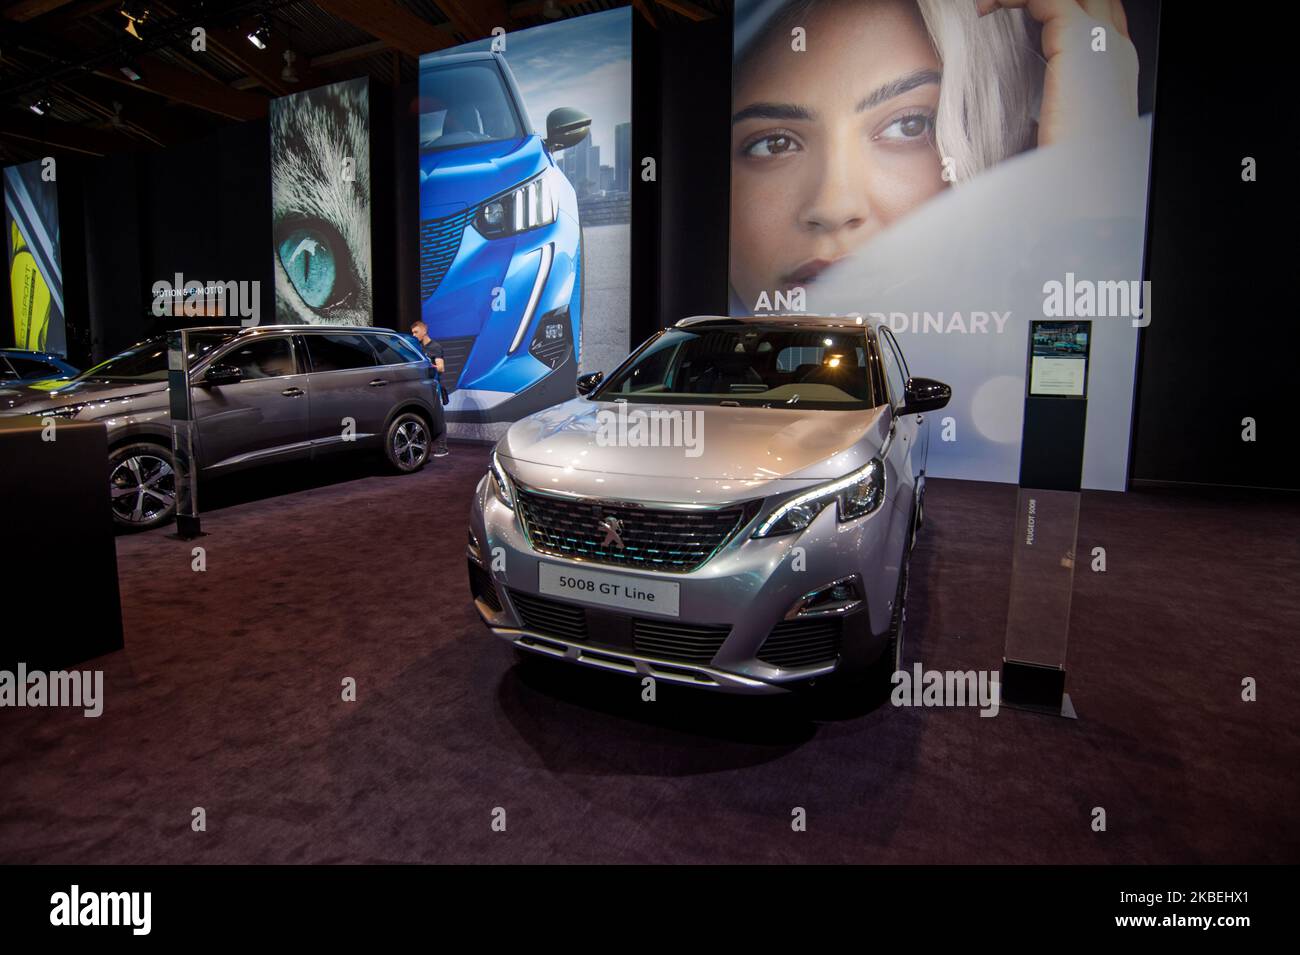 French automotive group Peugeot-Citroen-DS-Opel exhibits its model Peugeot 5008 GT Line at Brussels Motor Show 2020 on January 09, 2020, in Brussel, Belgium.s (Photo by Daniel Pier/NurPhoto) Stock Photo